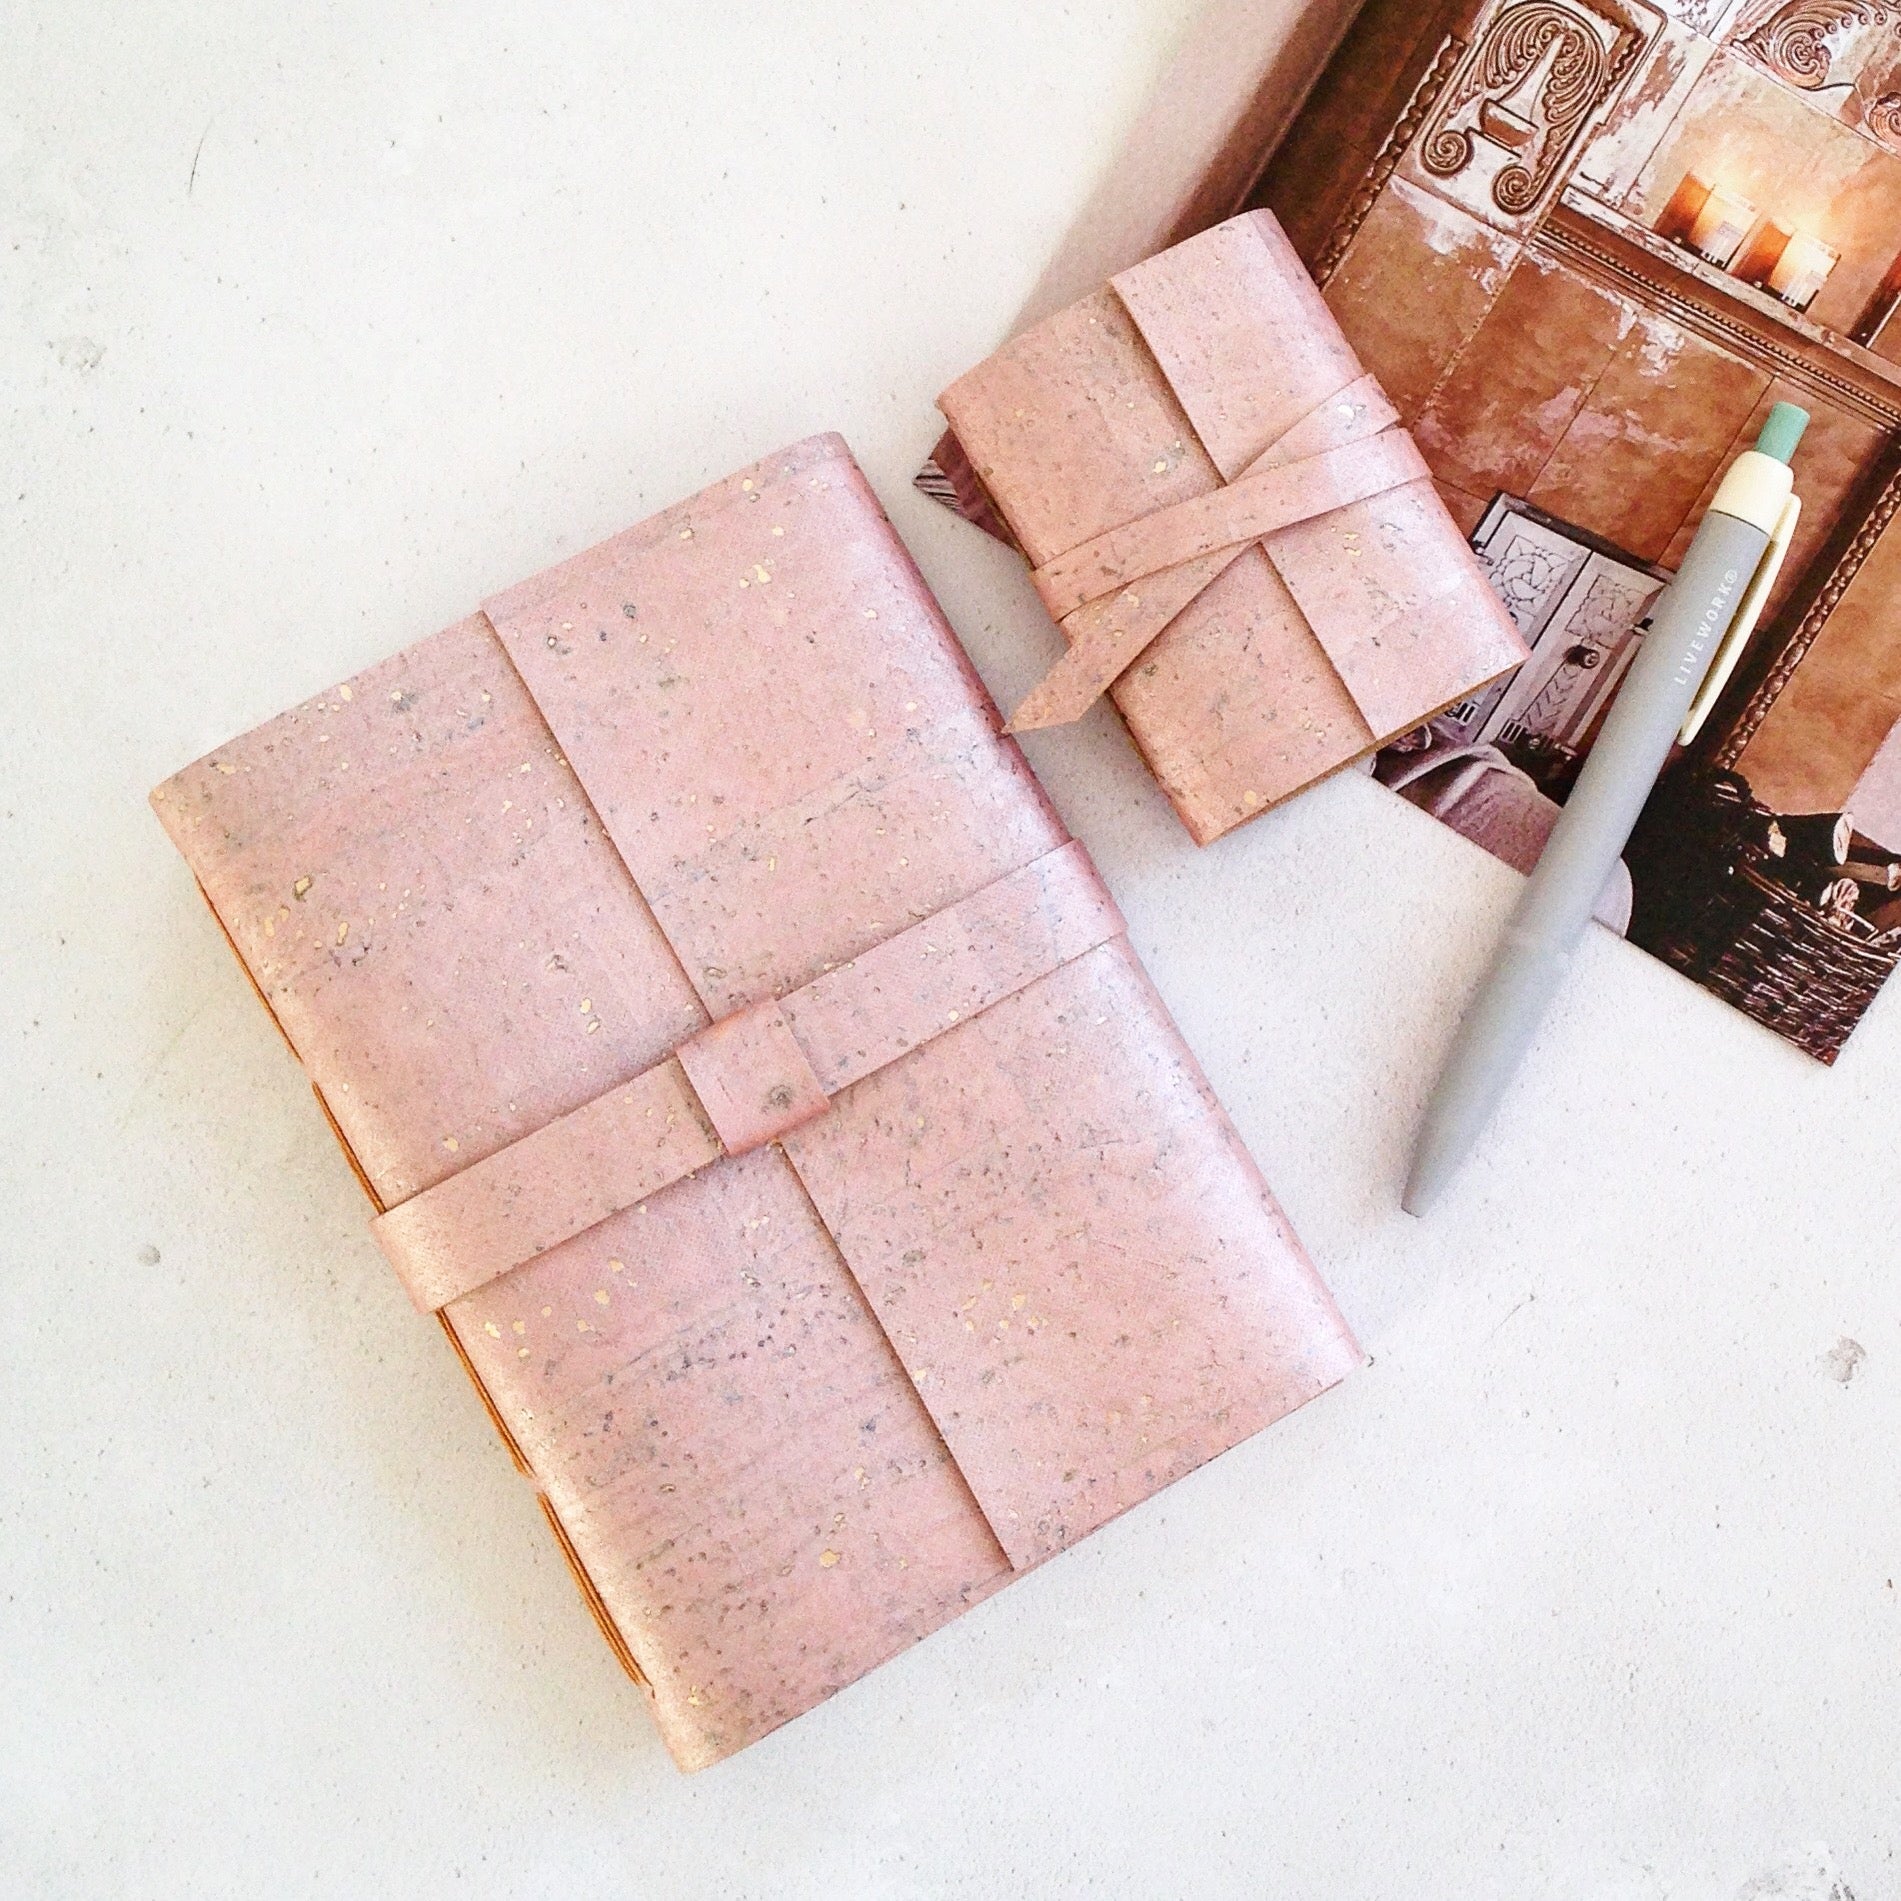 A6 and Mini Journals bound in Rose Gold Cork, with a pen and handmade envelope